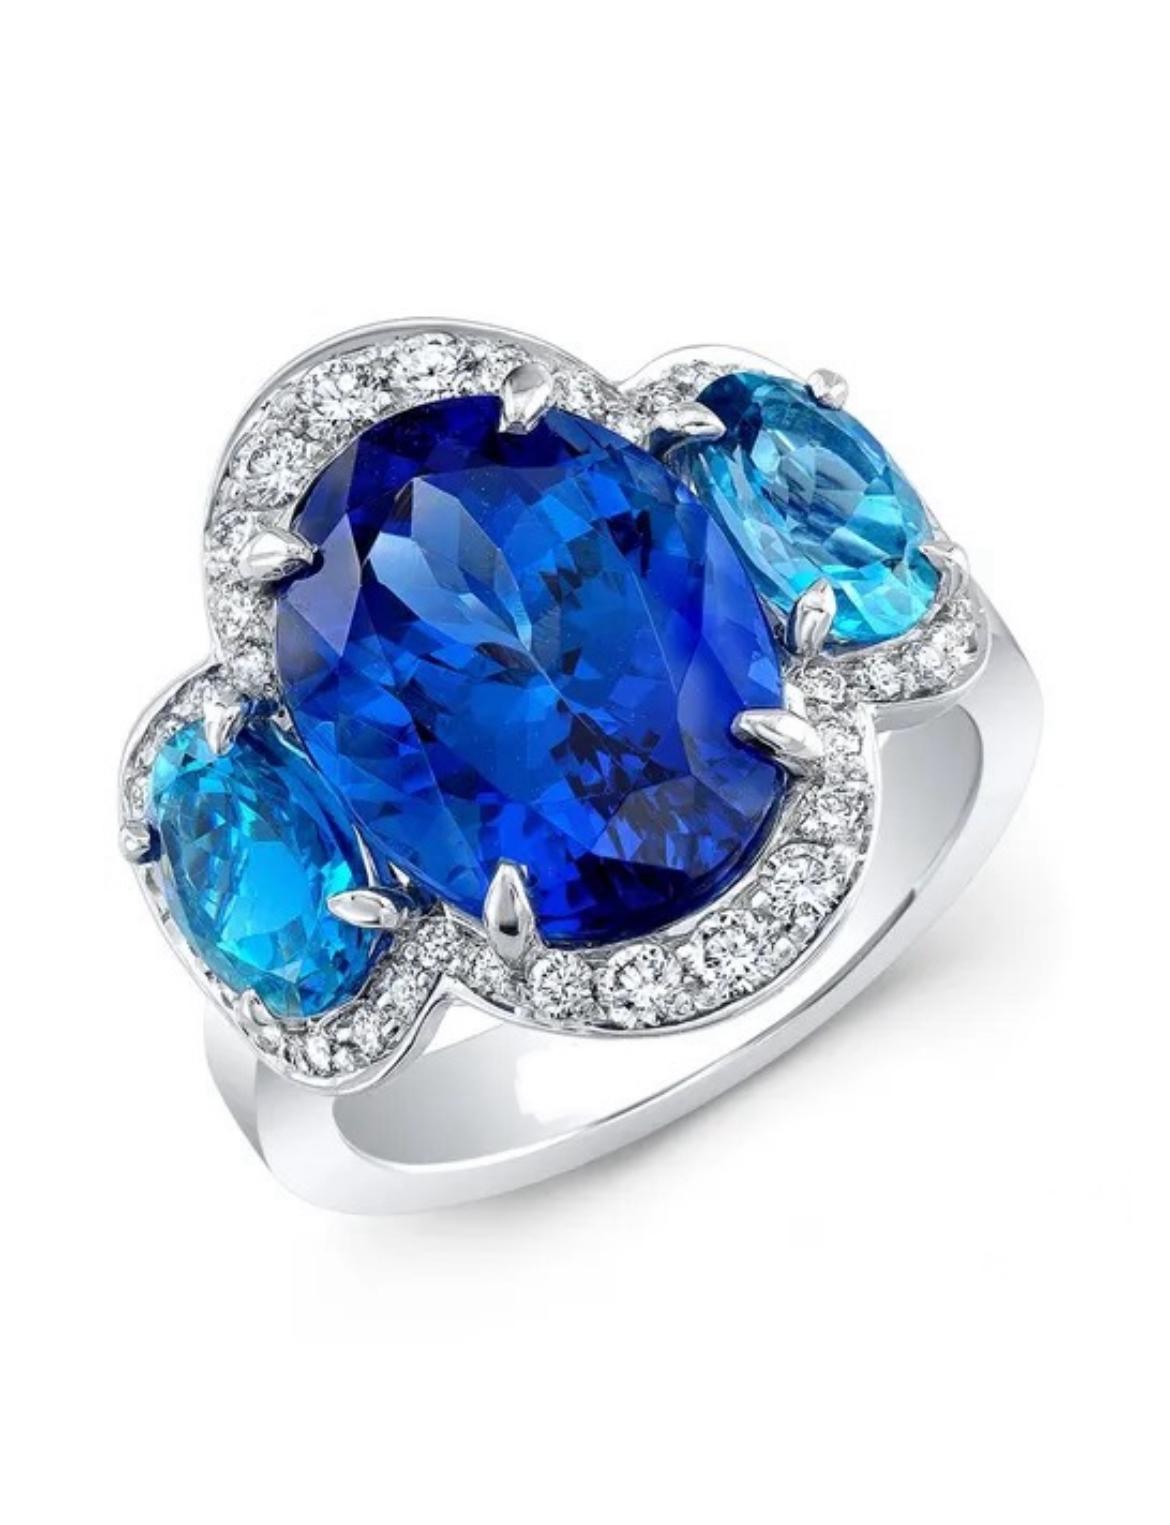 Oval Cut 6.70ct Tanzanite and Aquamarine ring. For Sale